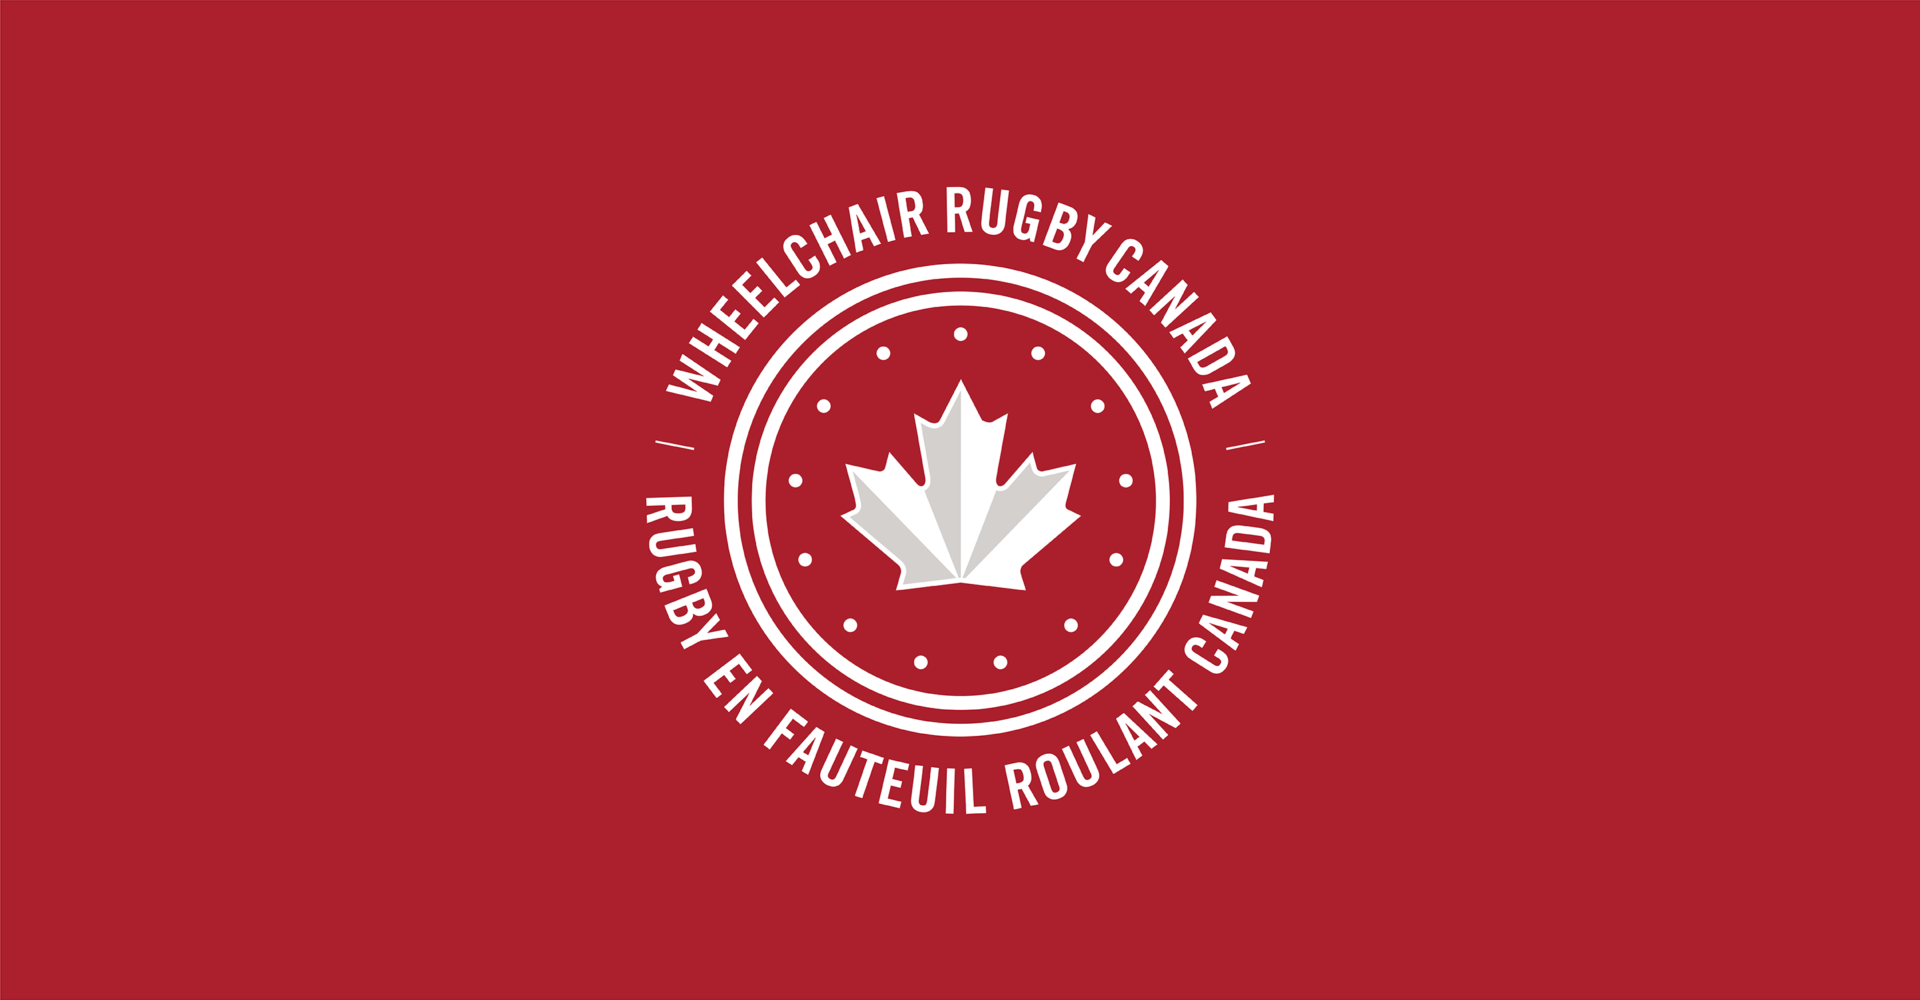 Canada will compete in Pool B at 2022 World Wheelchair Rugby Championships